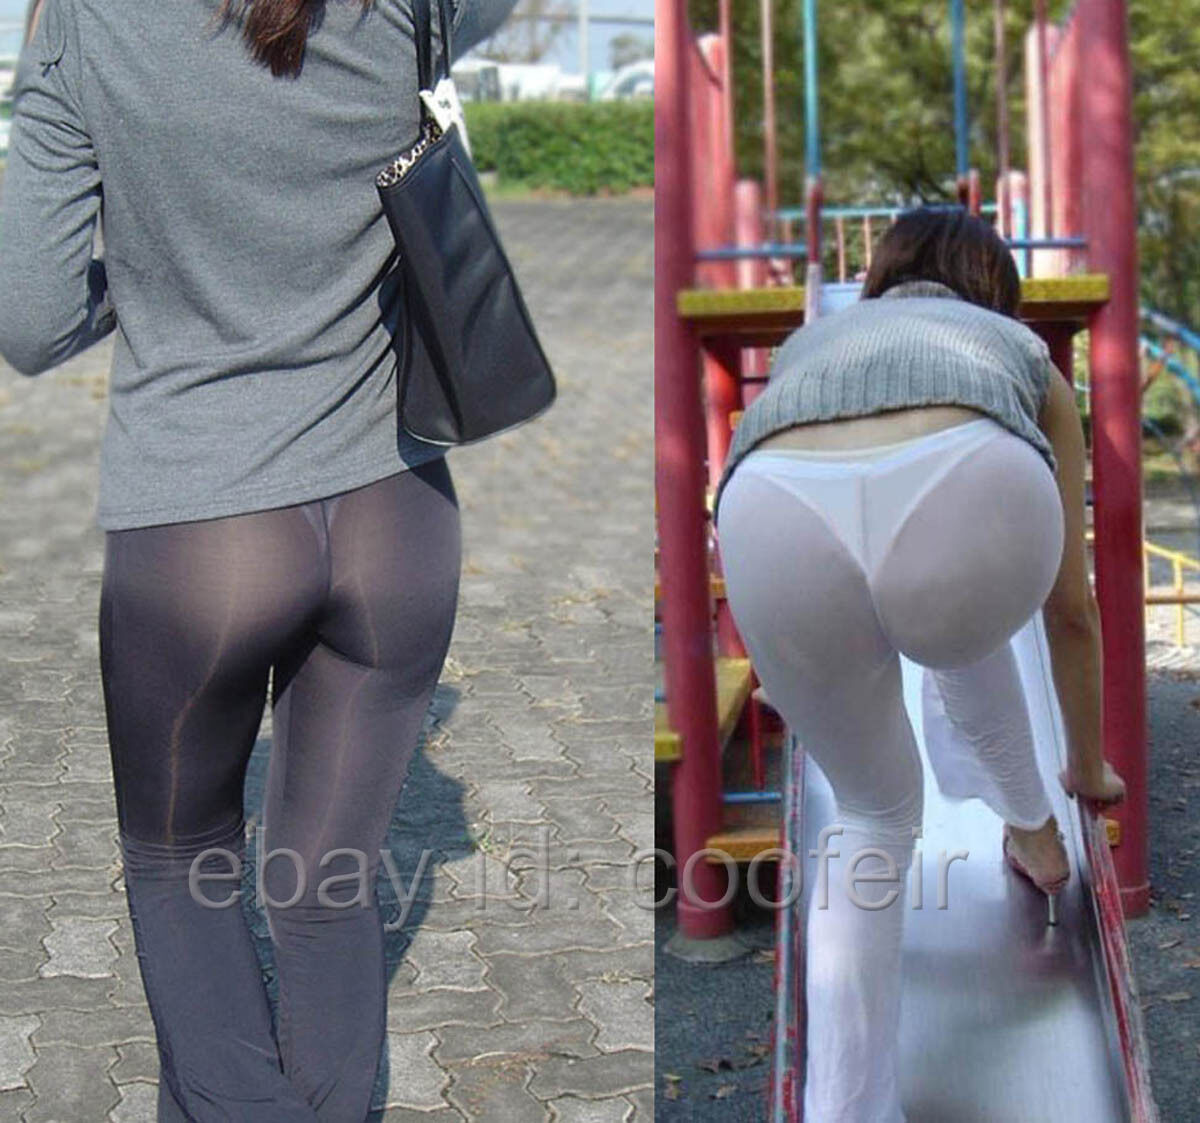 yoga in see through public pants